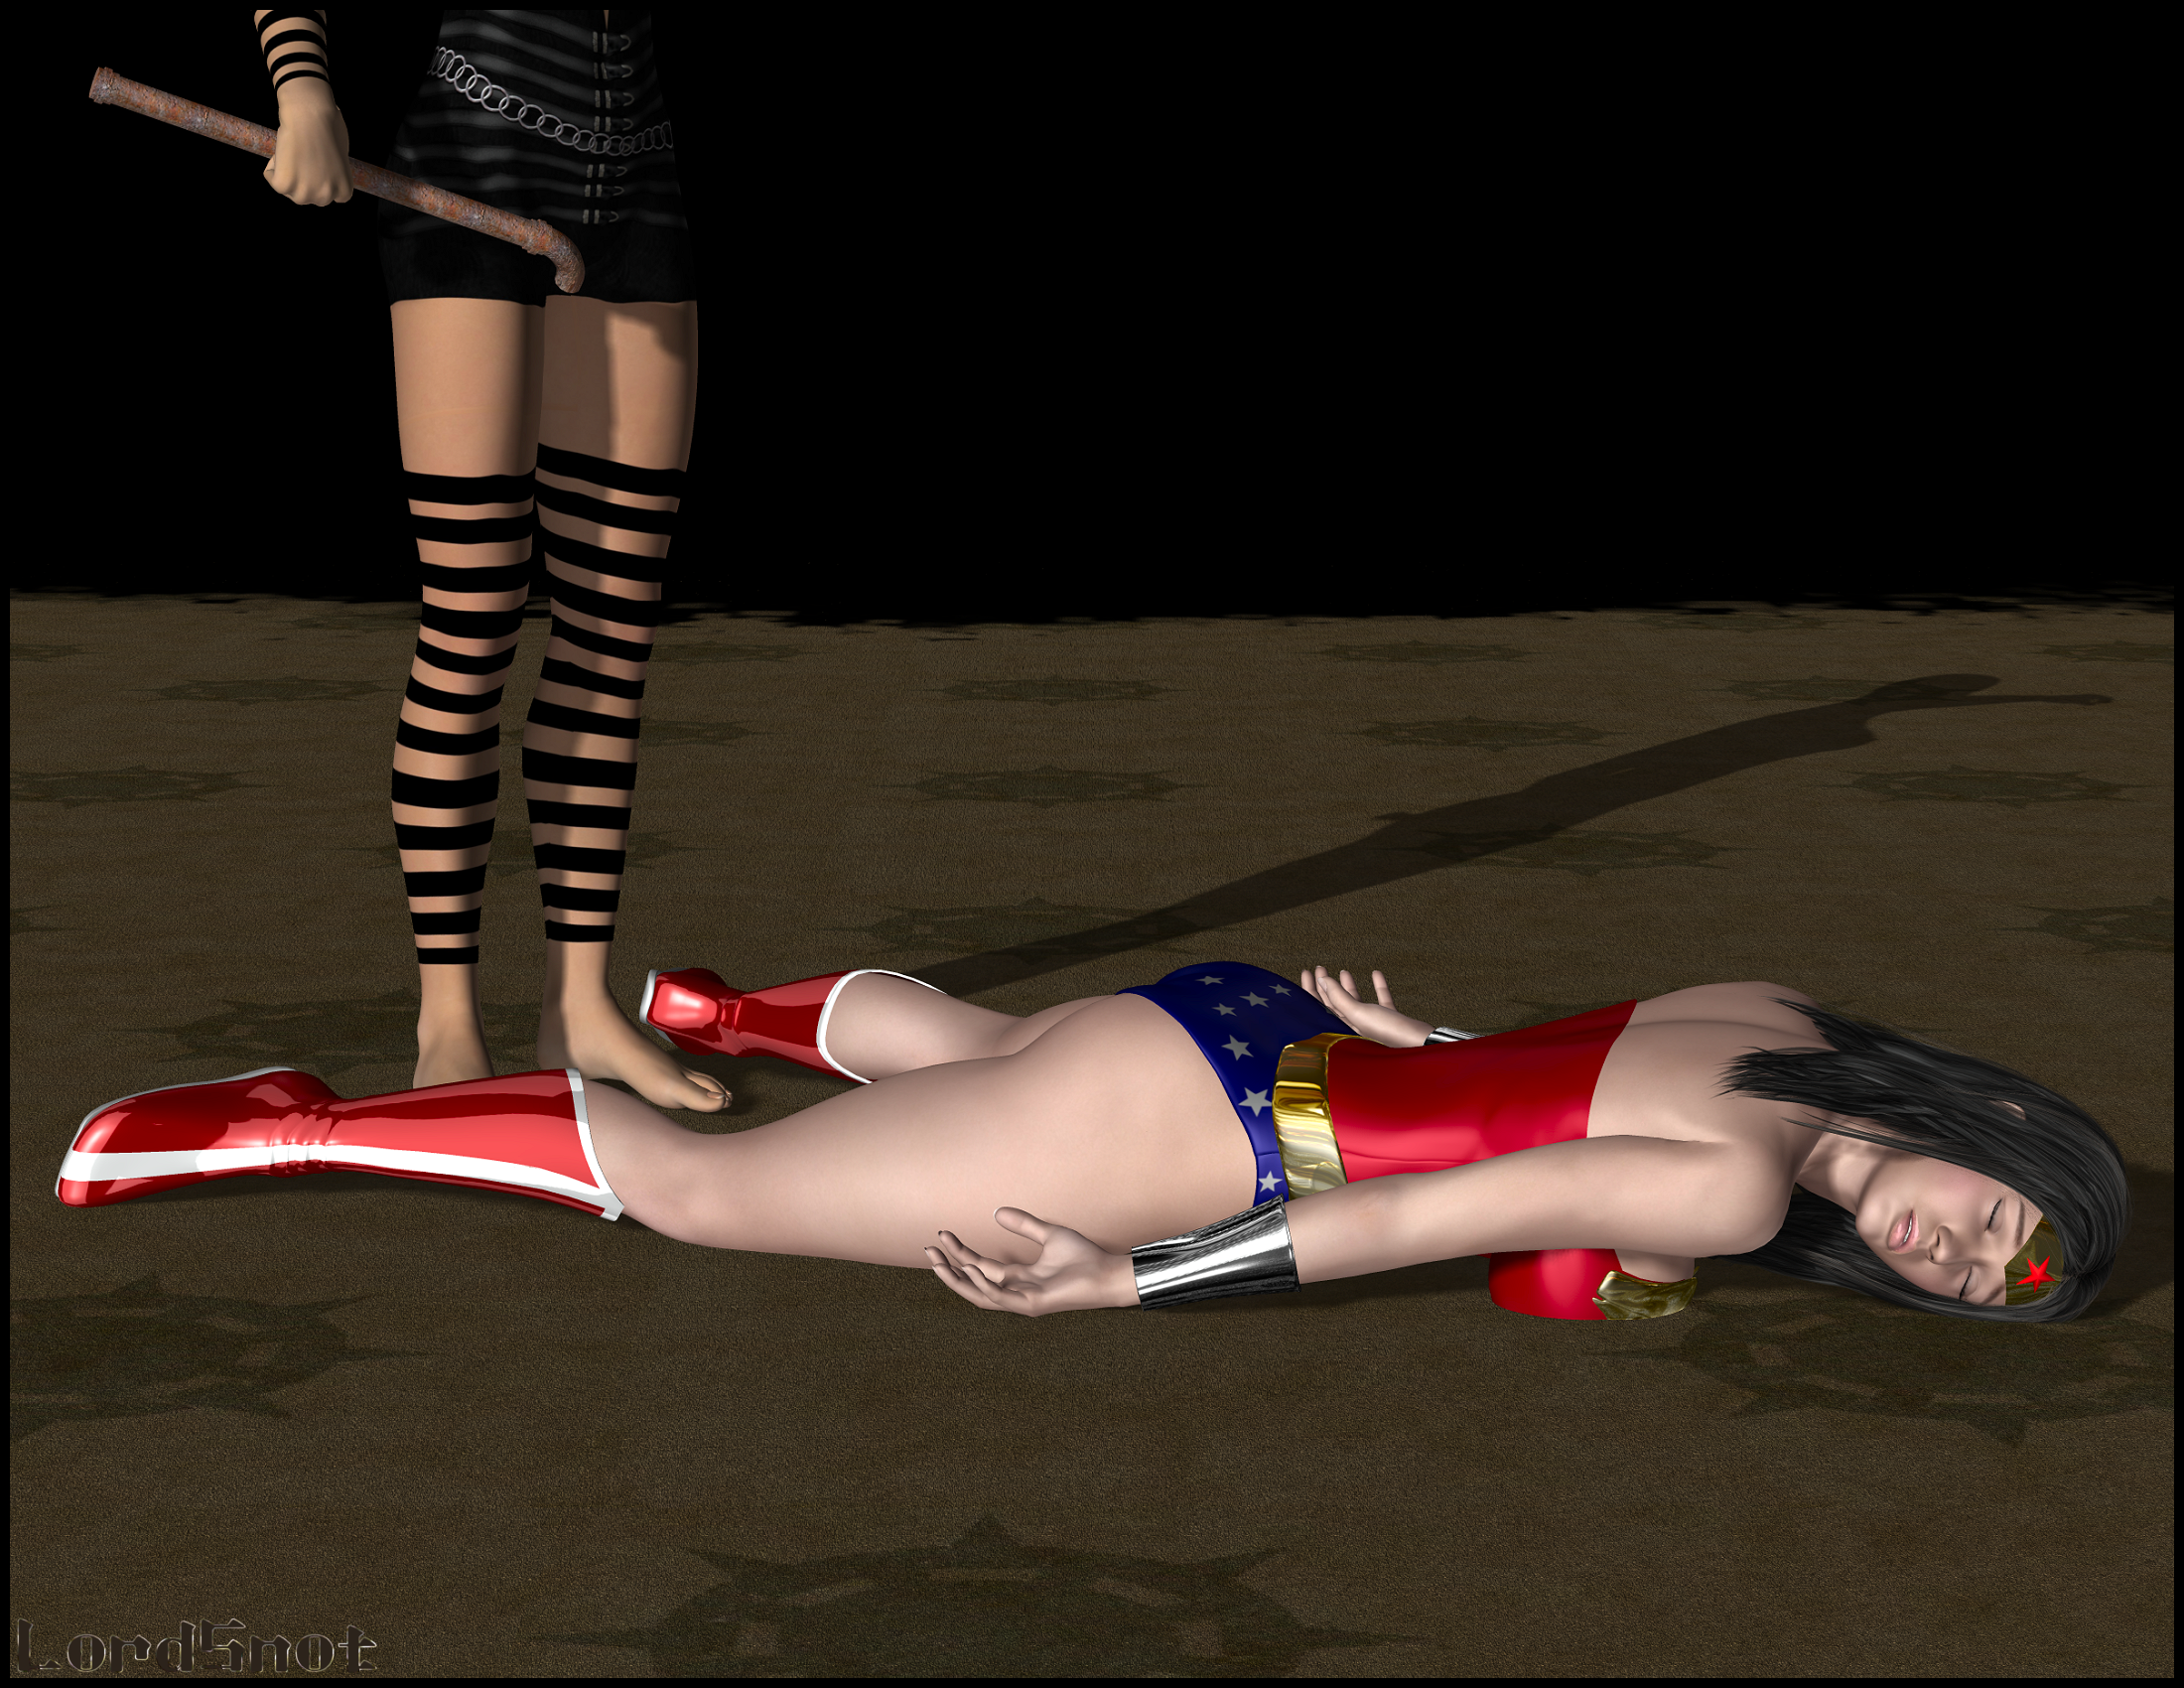 Wonder Woman Knocked Out 02 By Lordsnot On Deviantart.